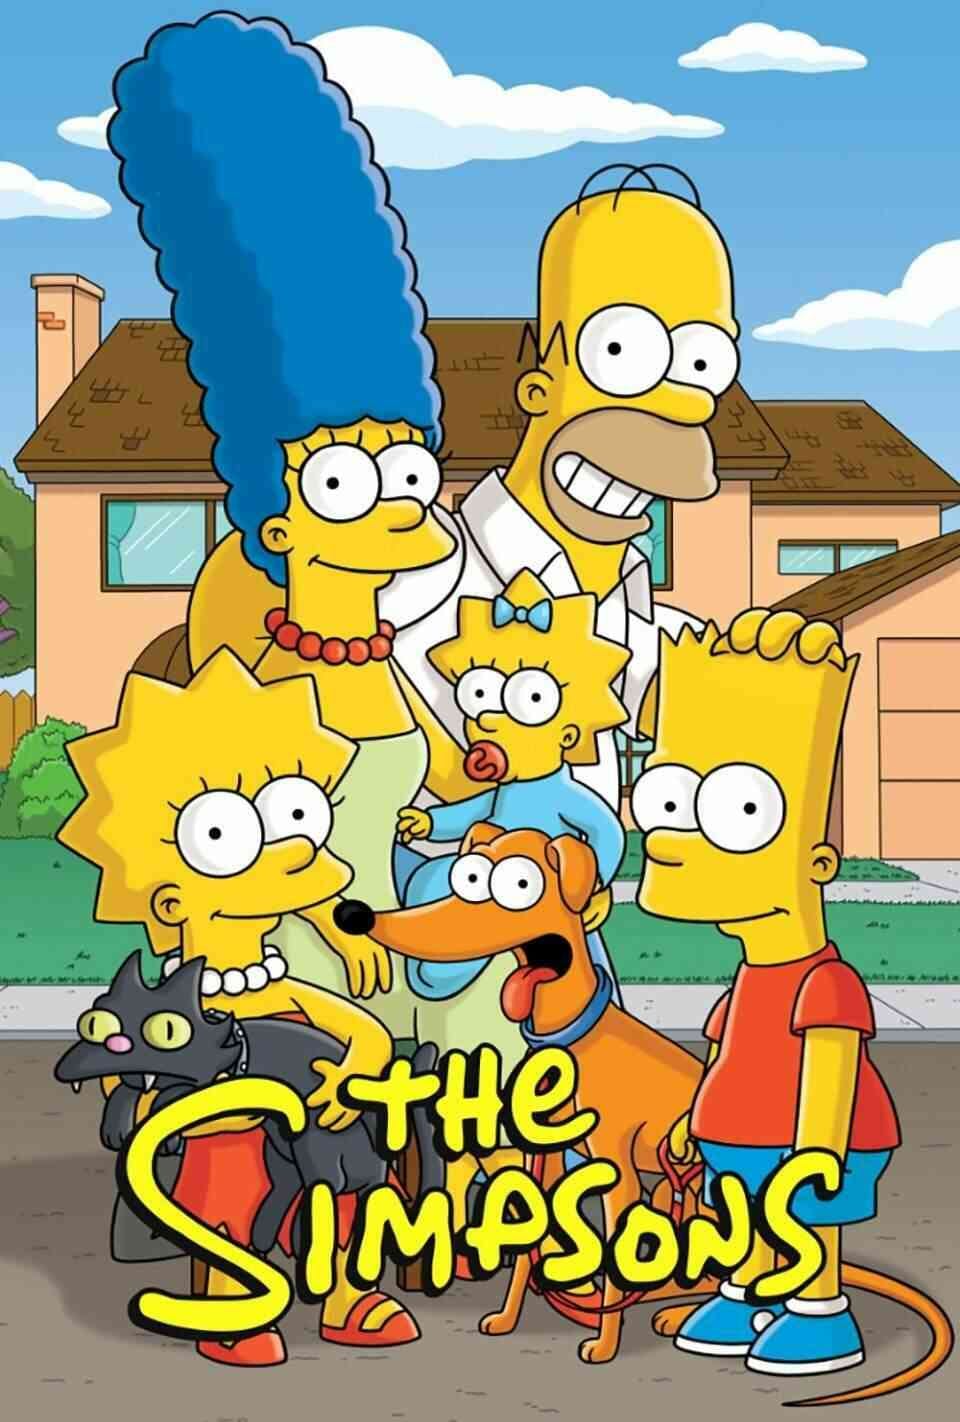 Read The Simpsons screenplay.